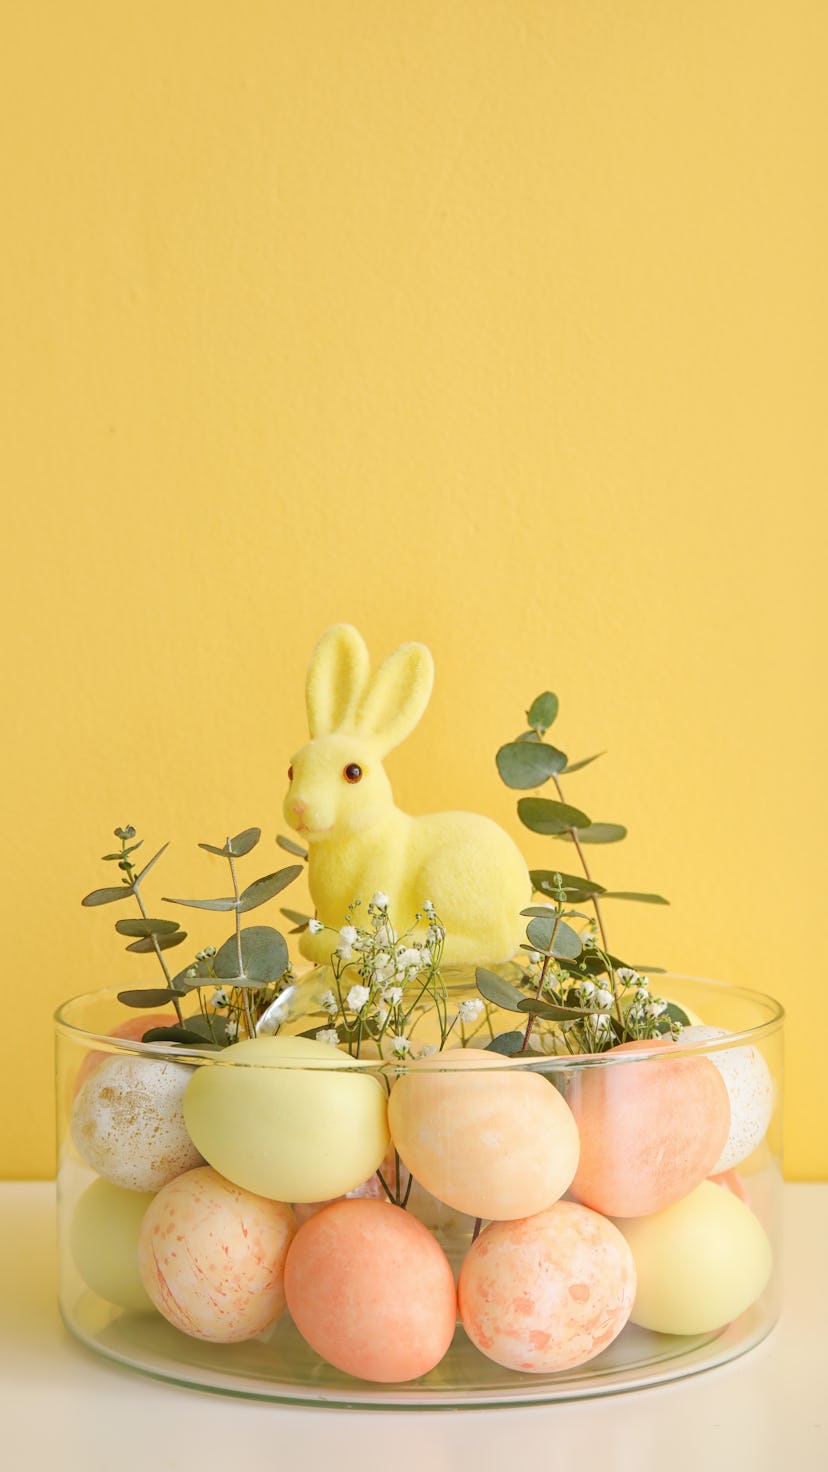 Bowl with Easter eggs, rabbit, and floral decor as Easter table setting.